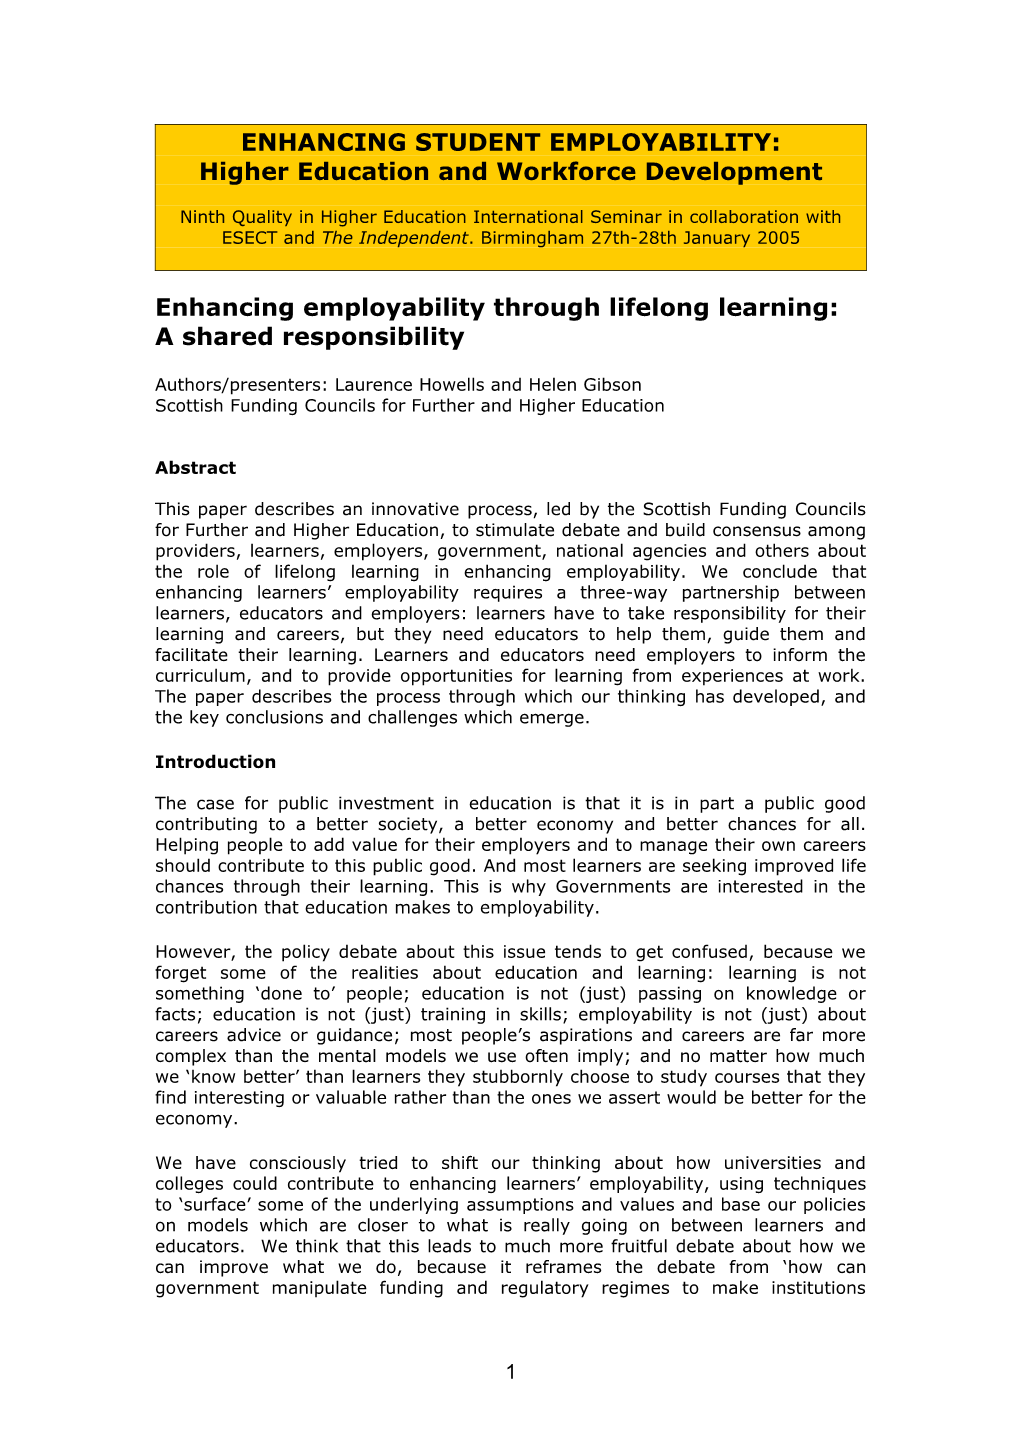 Parallel Paper for the 9Th Quality in HE International Seminar: Enhancing Student Employability